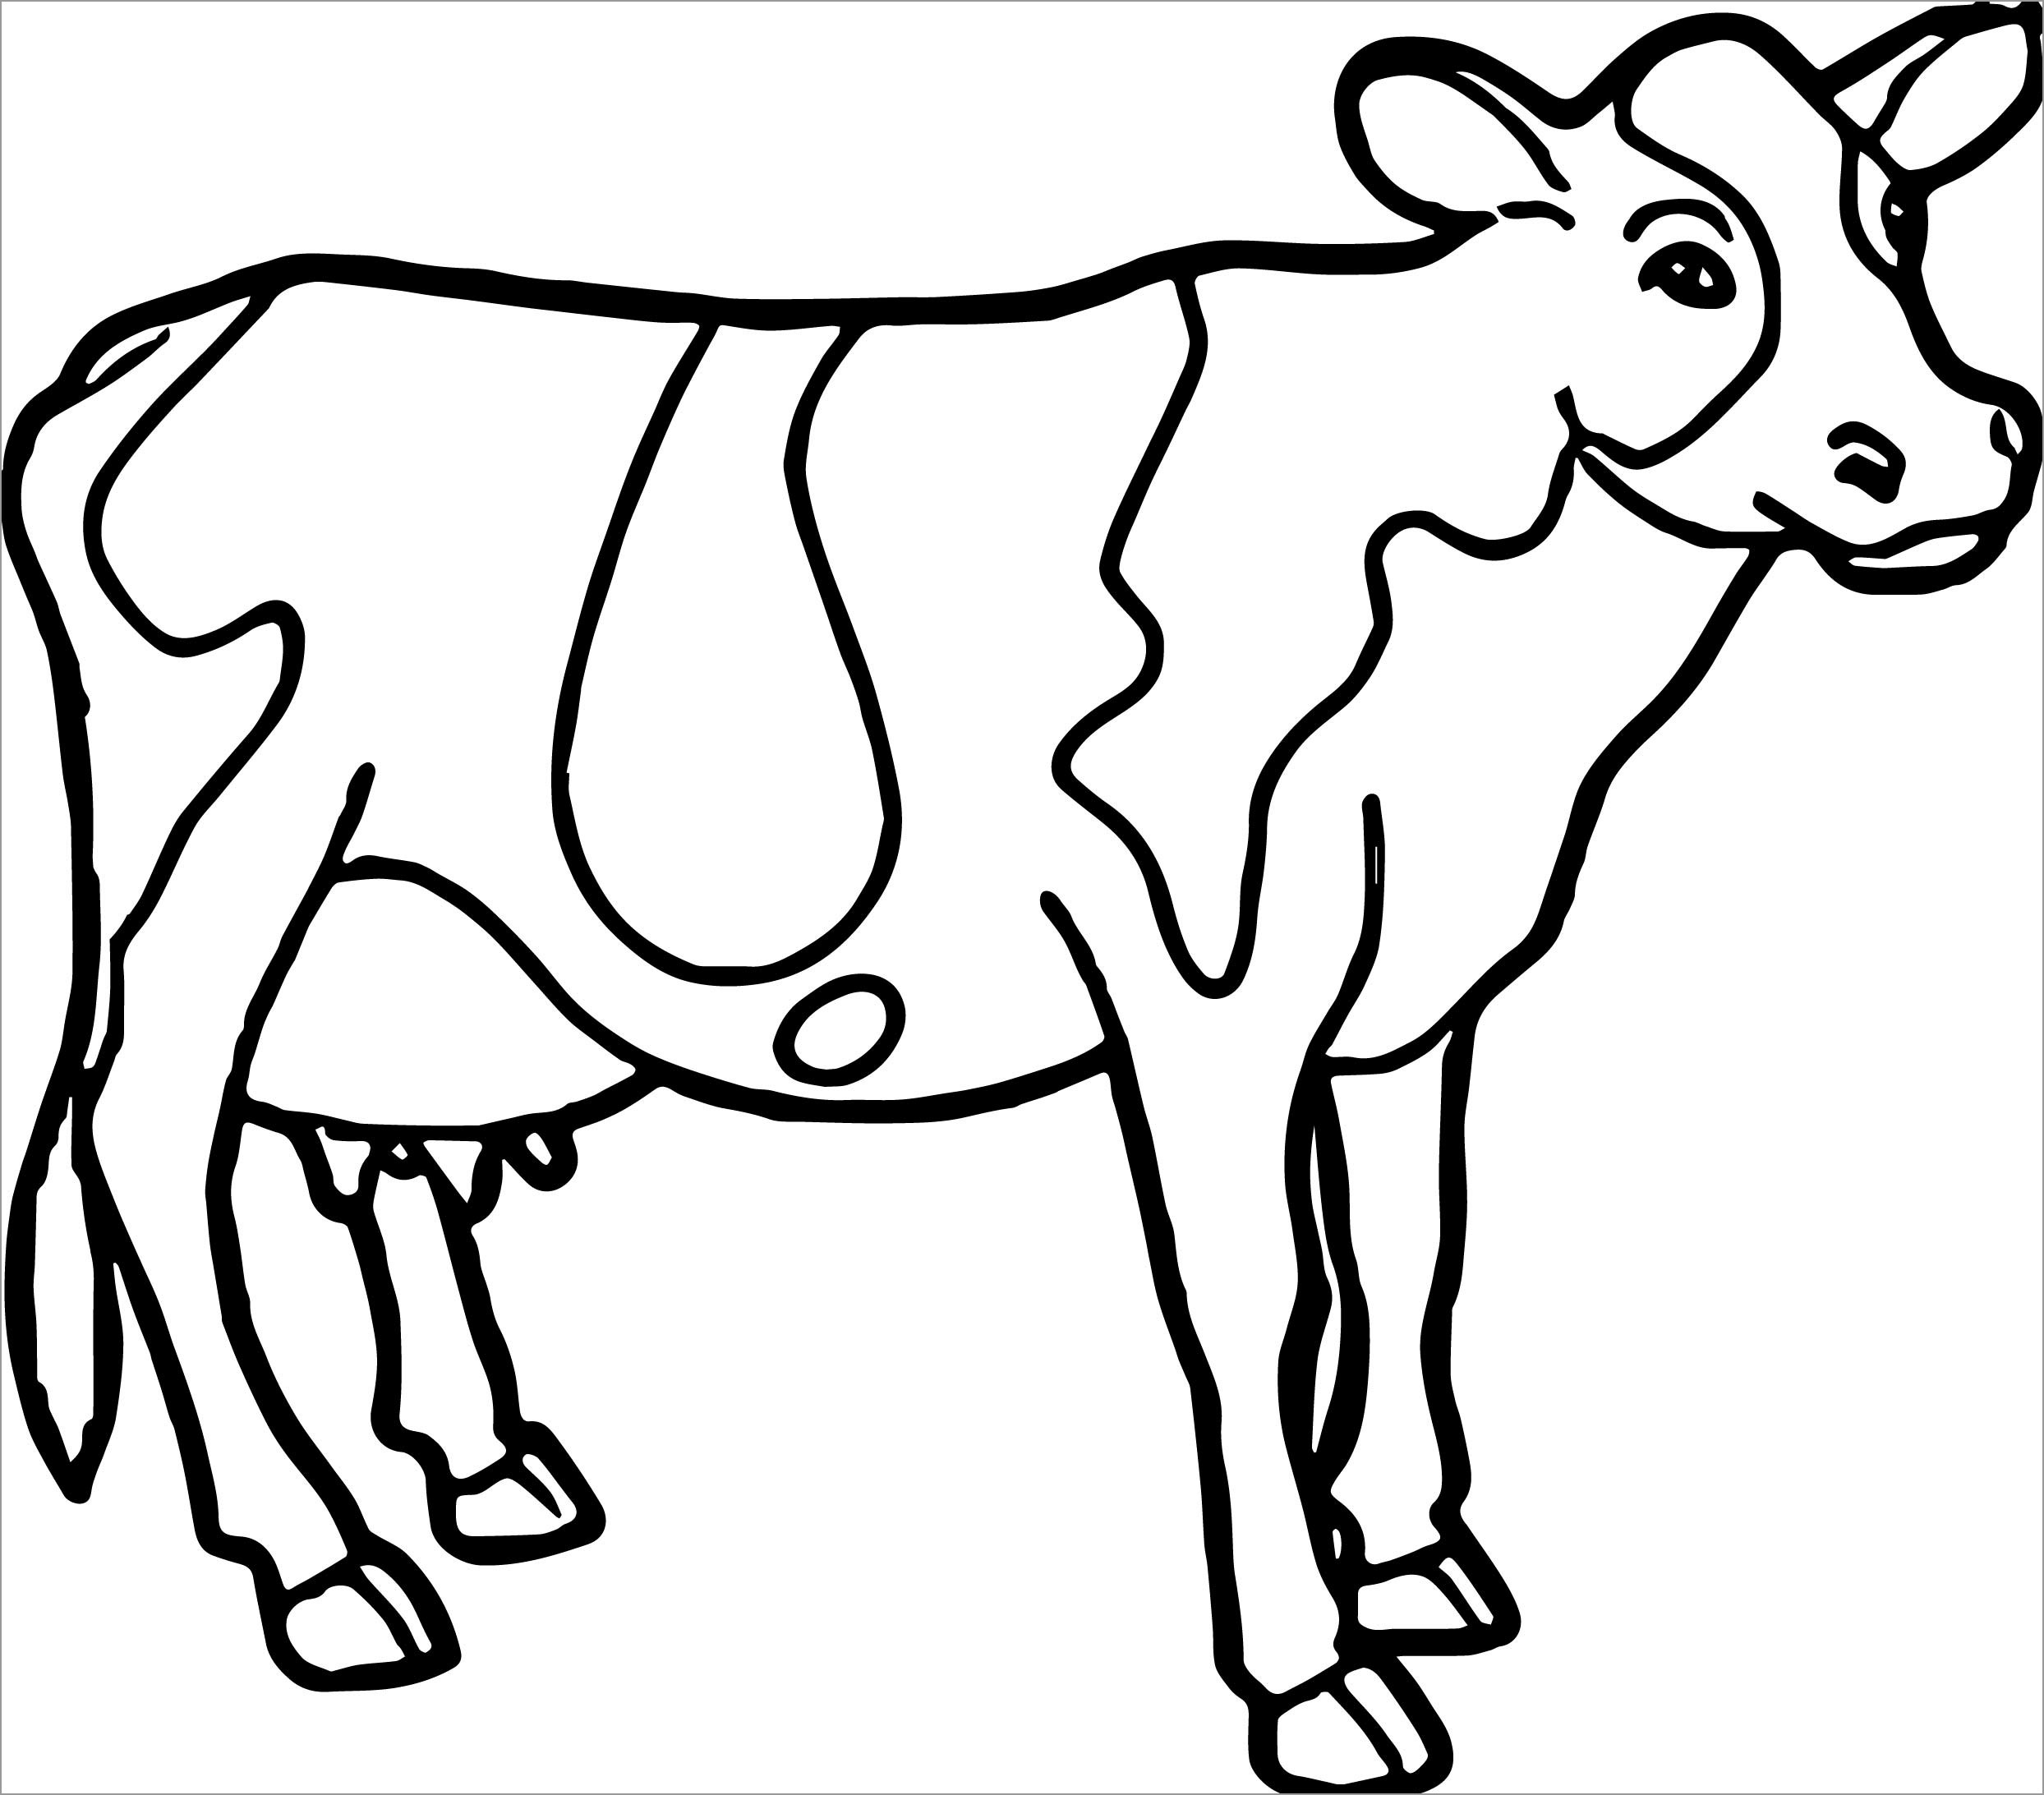 Printable Cattle Coloring Page